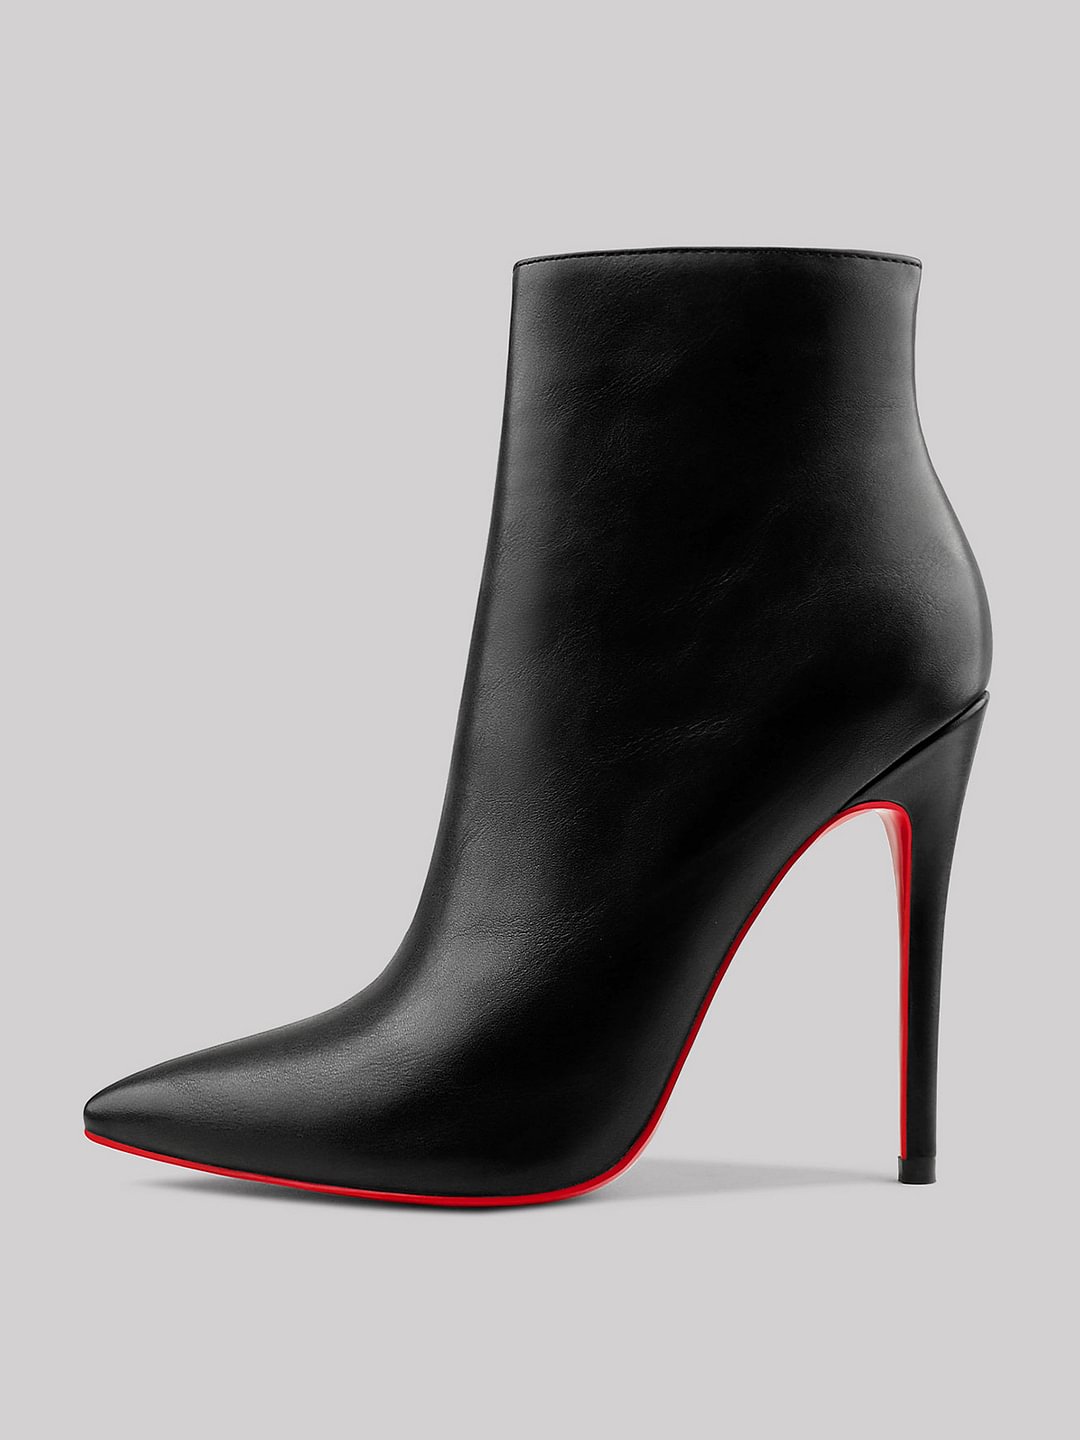 4.72" Women's Ankle Boots Closed Pointed Toe Stilettos Booties Red Bottom Heels Matte Shoes